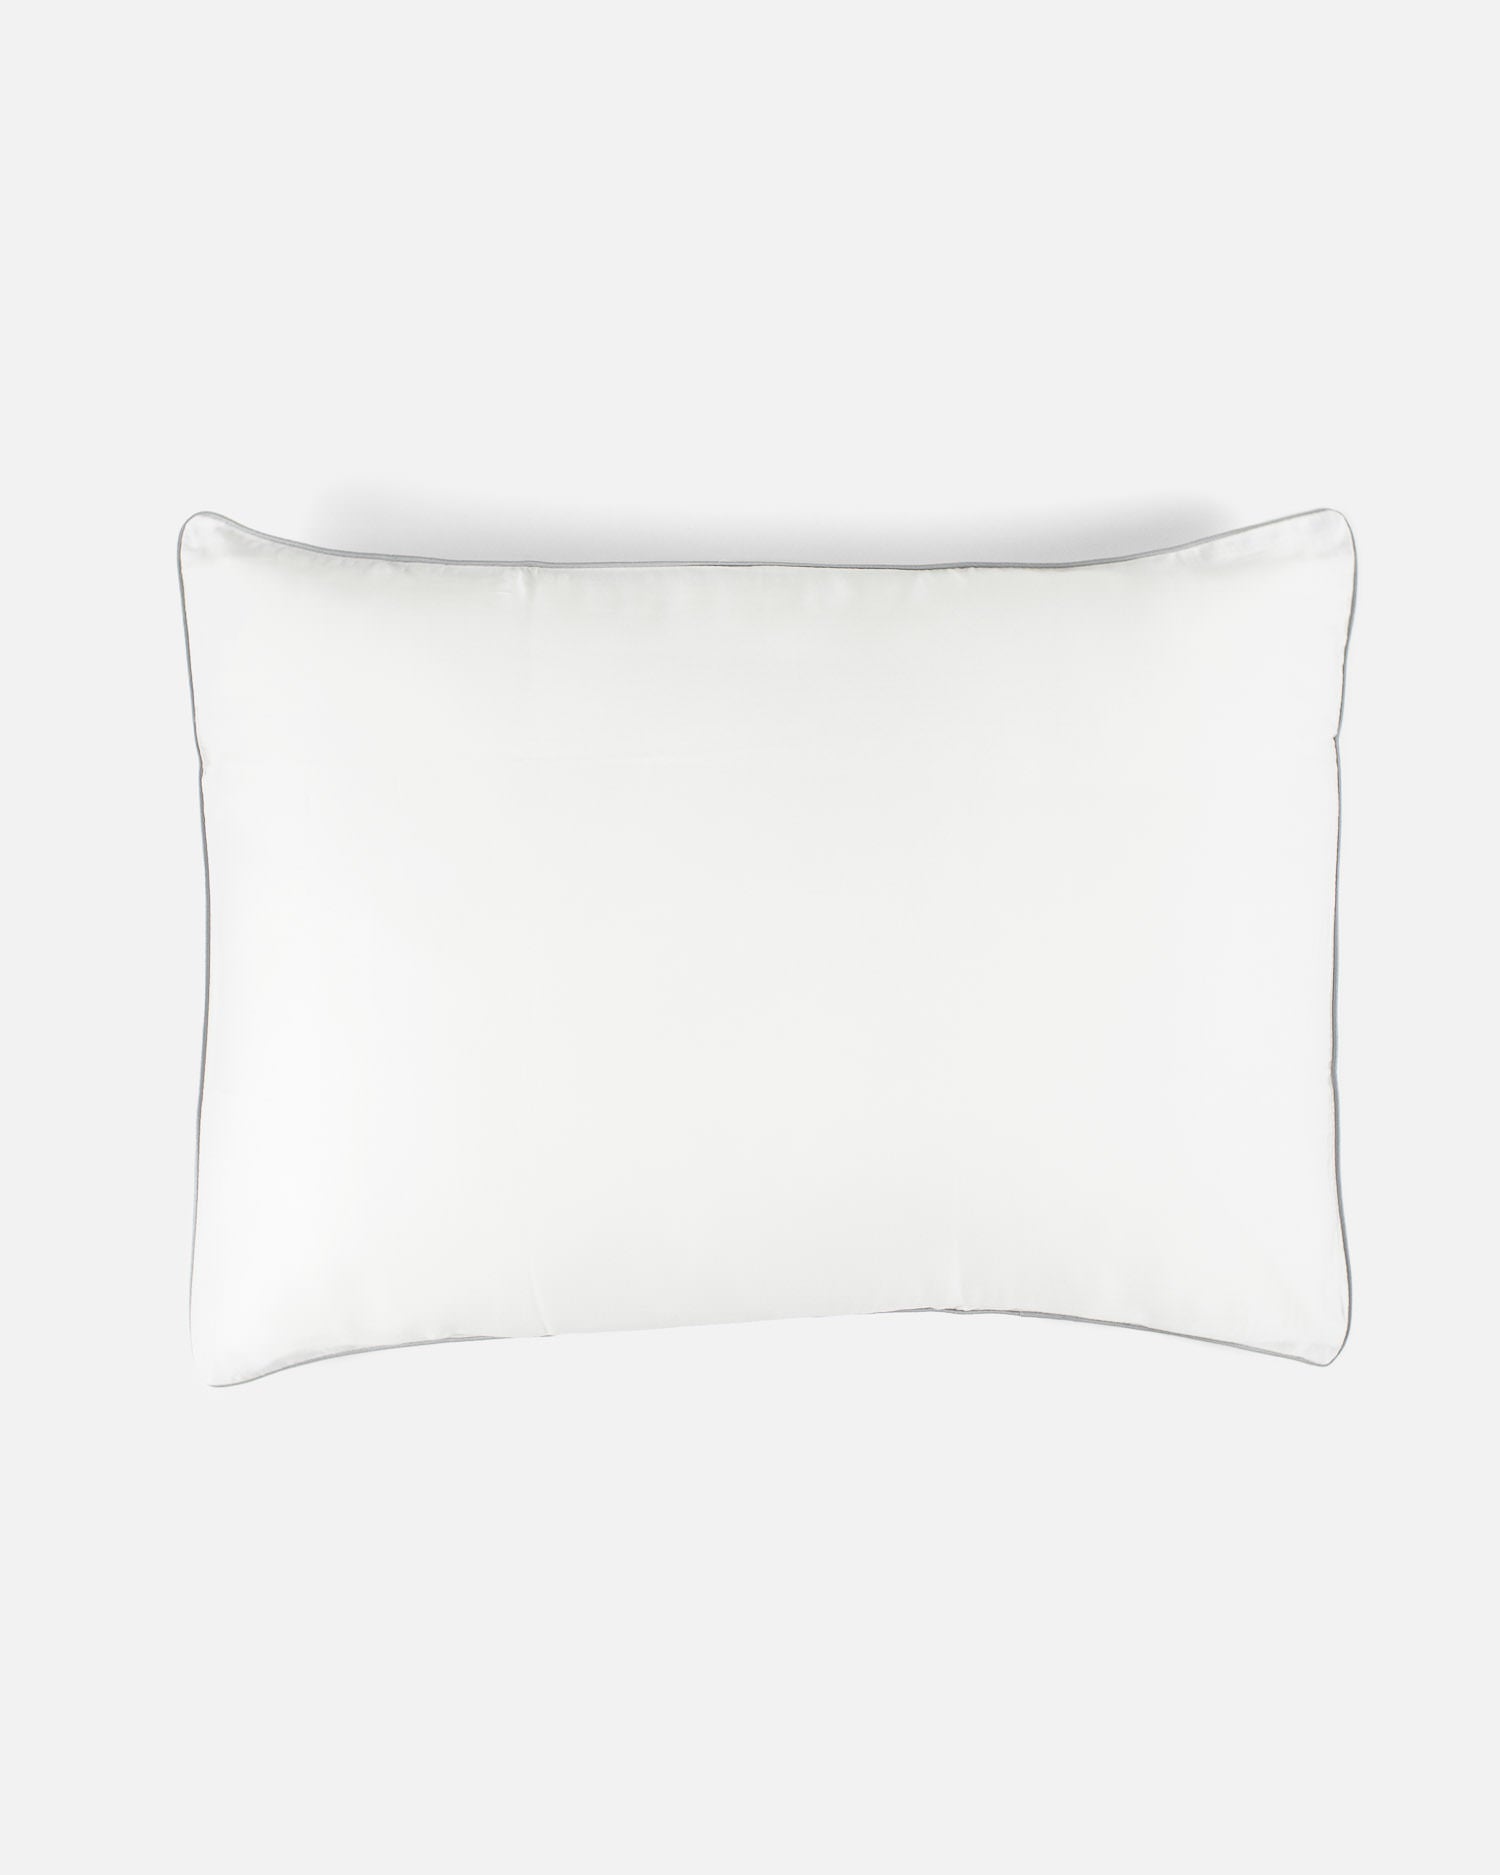 ava and ava organic bamboo lyocell toddler pillowcases / mini pillowcases / tempur pillowcase. hypoallergenic soft and breathable. color white with gray piping